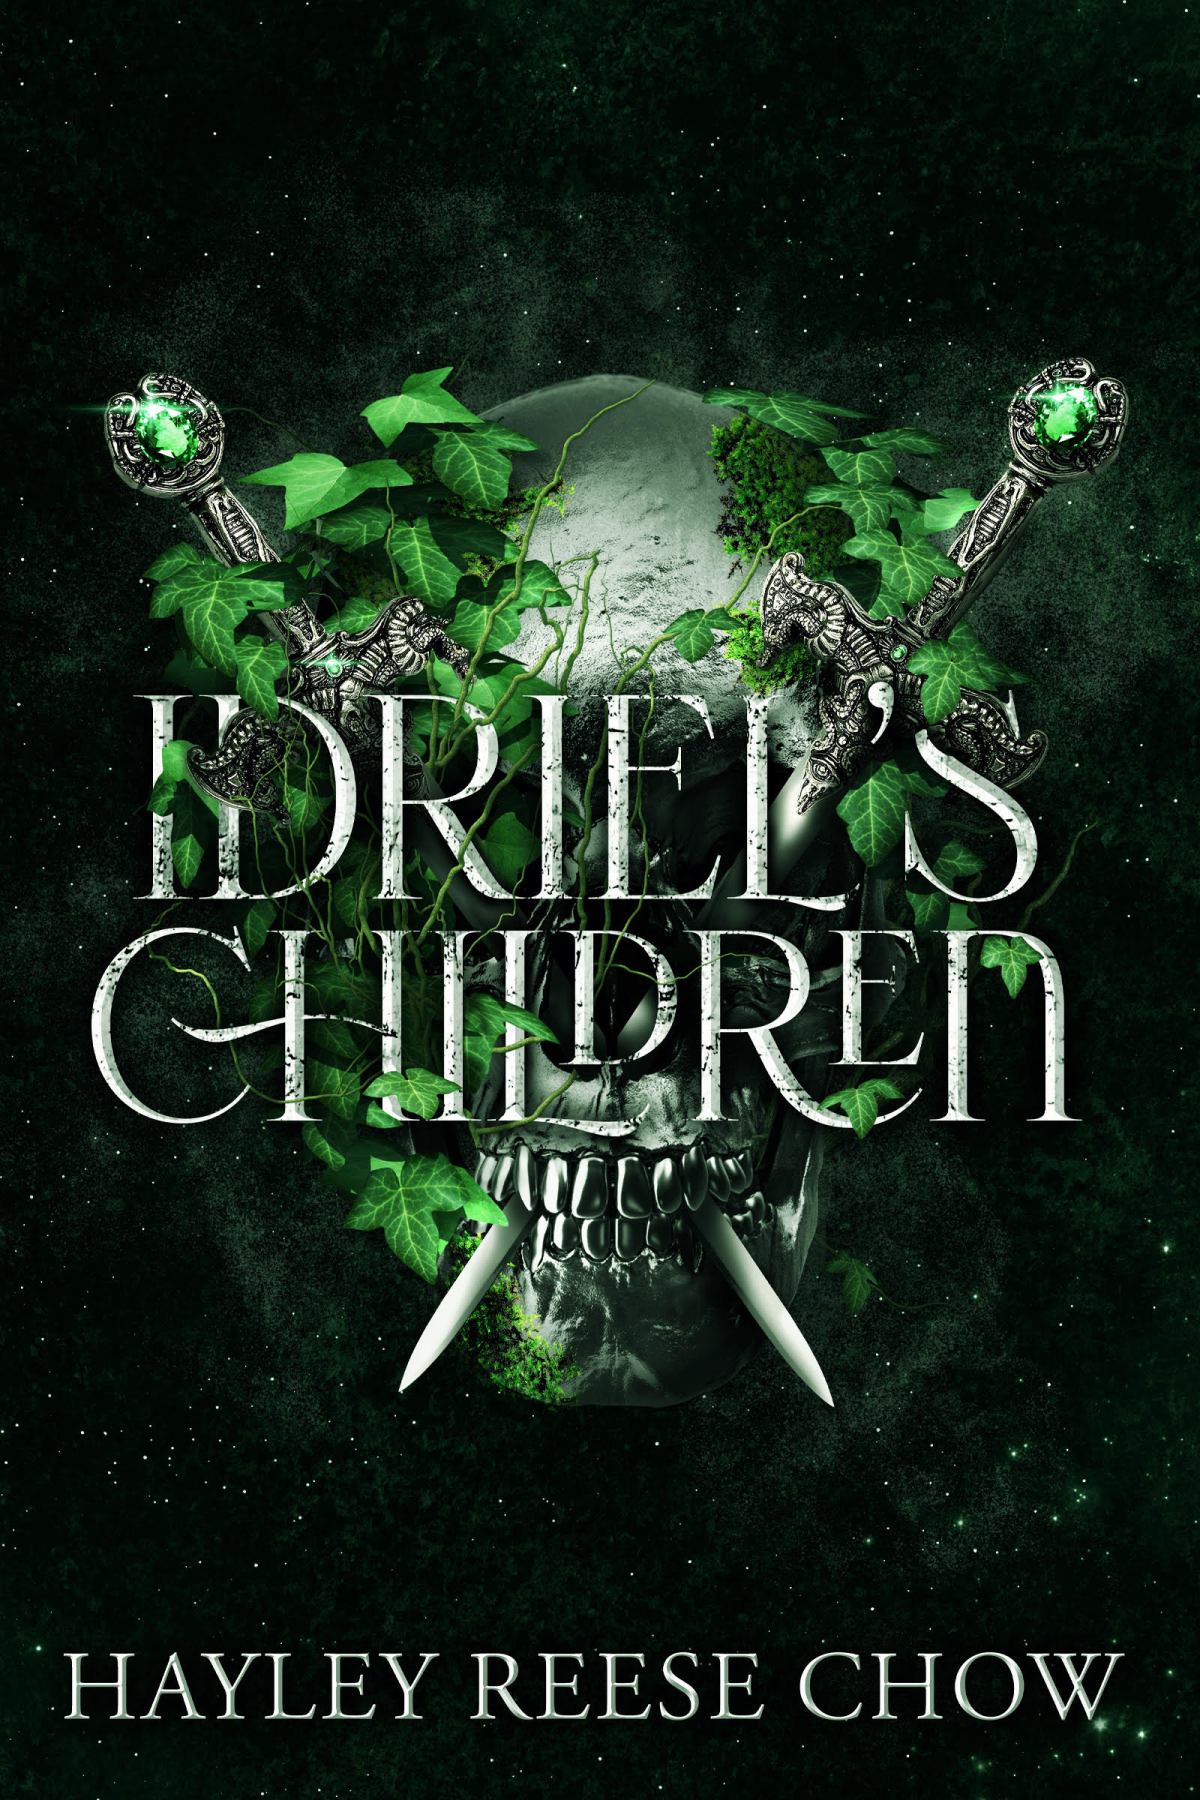 Idriel’s Children by Hayley Reese Chow